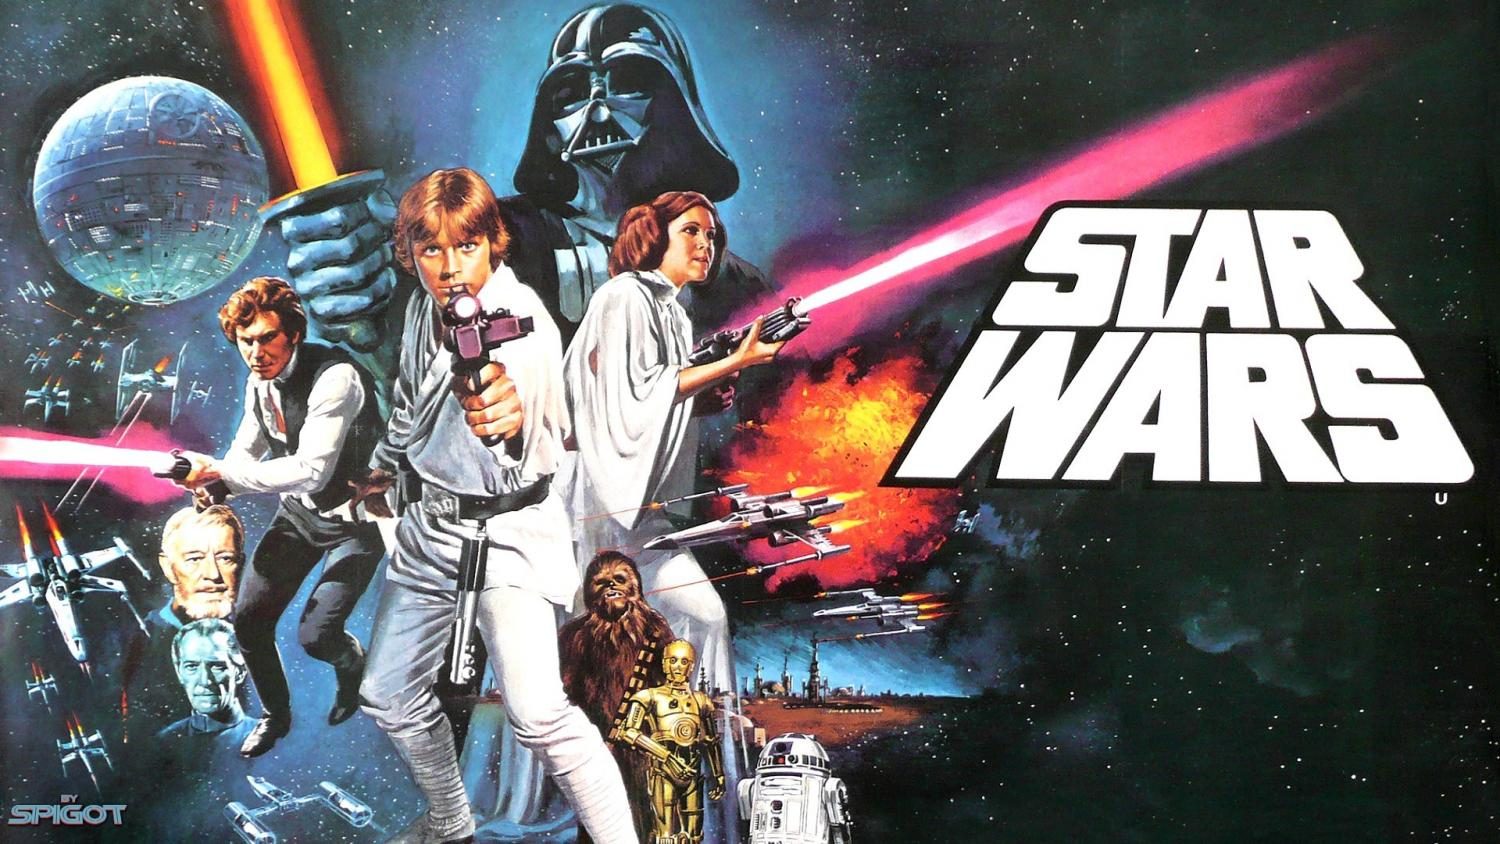 May the Force be With You: Celebrating Star Wars’ 40th Anniversary